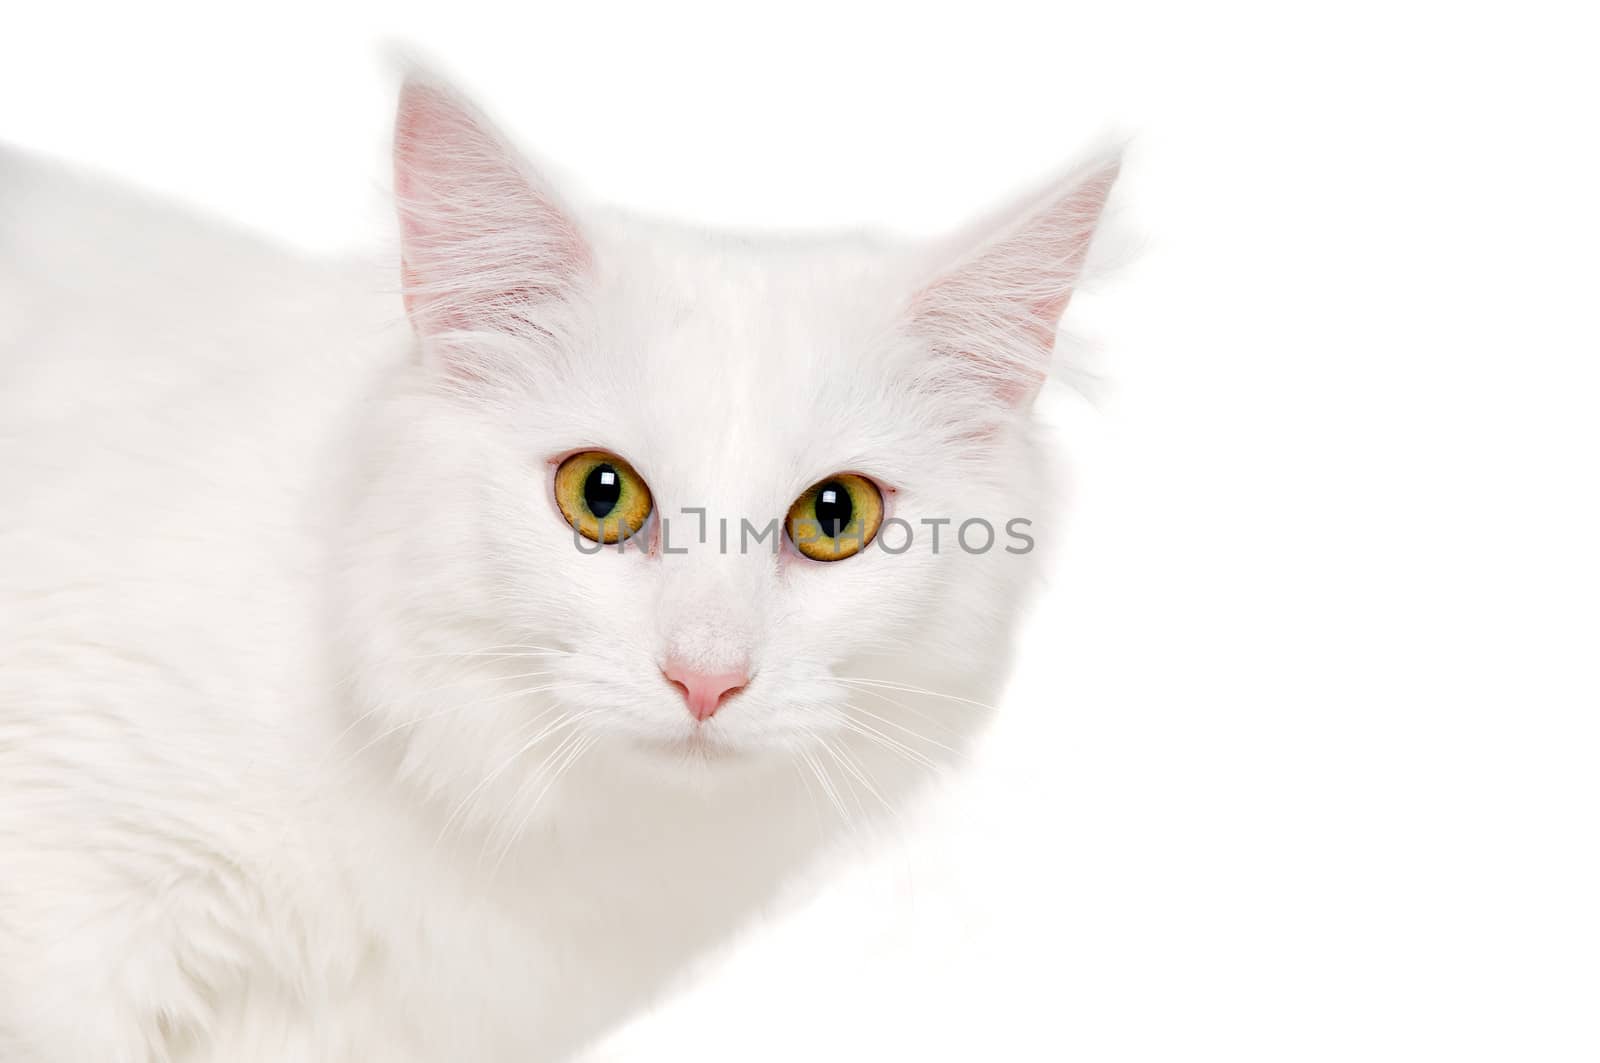 Face of a white cat on white background by cfoto